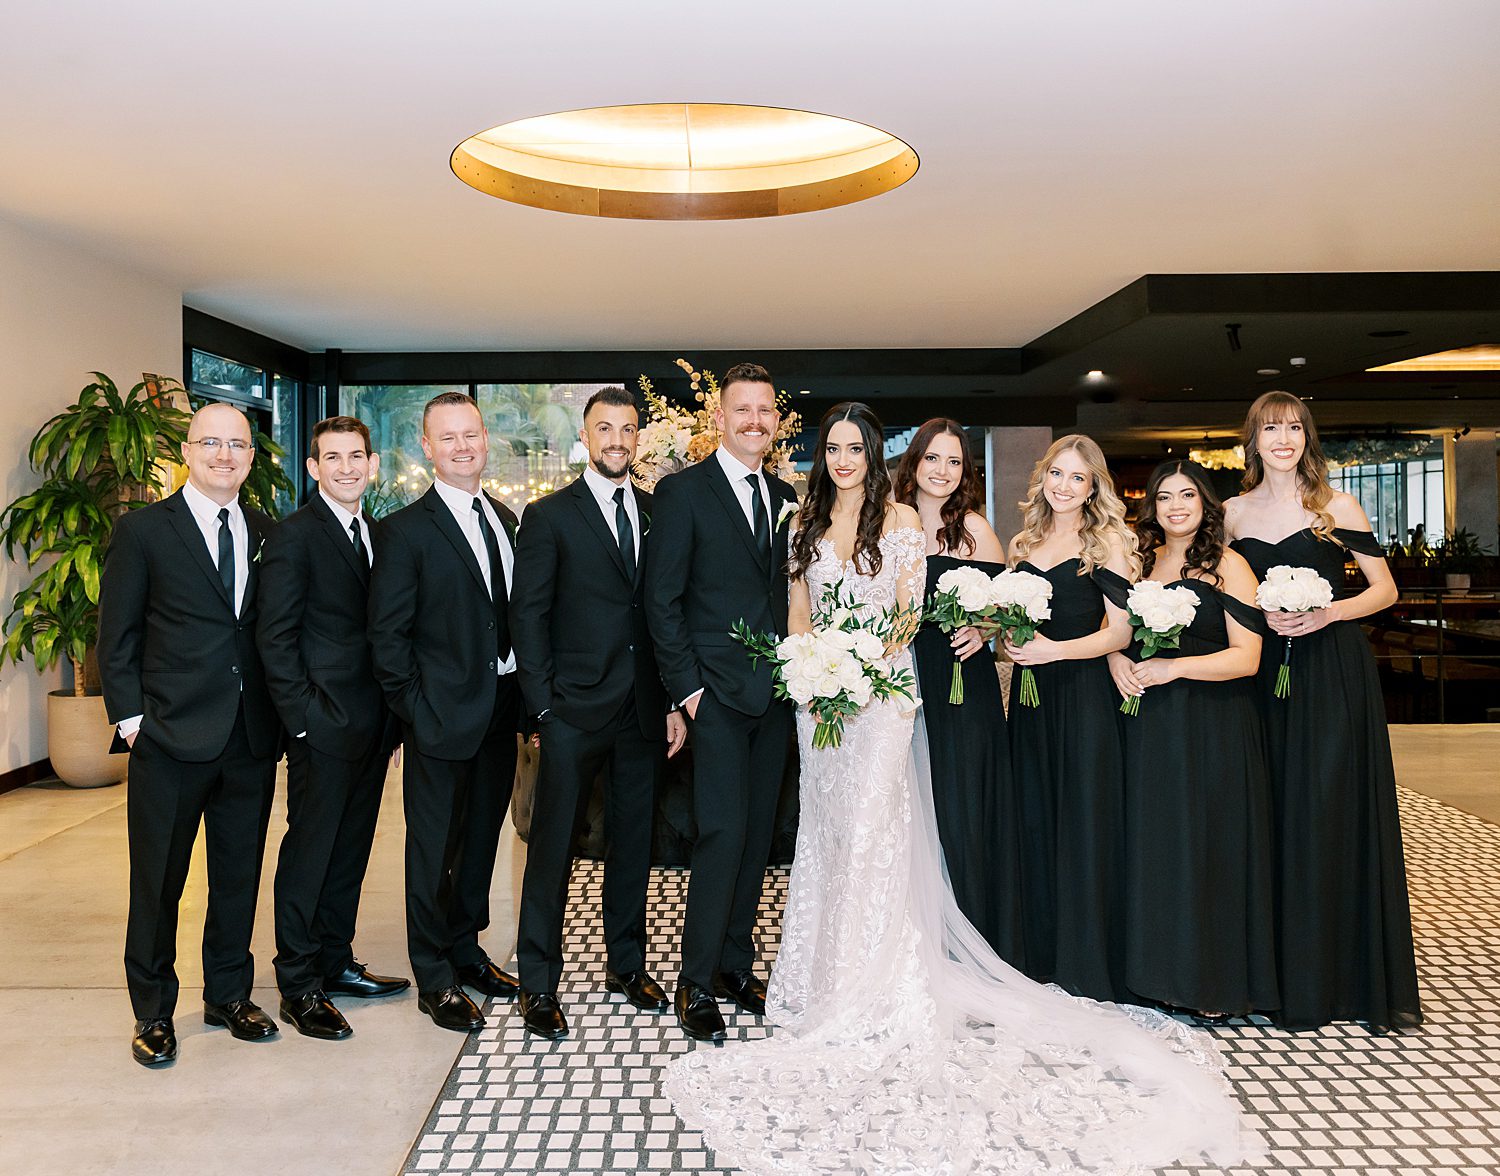 newlyweds pose with wedding party in all-black attire at the Hotel Haya